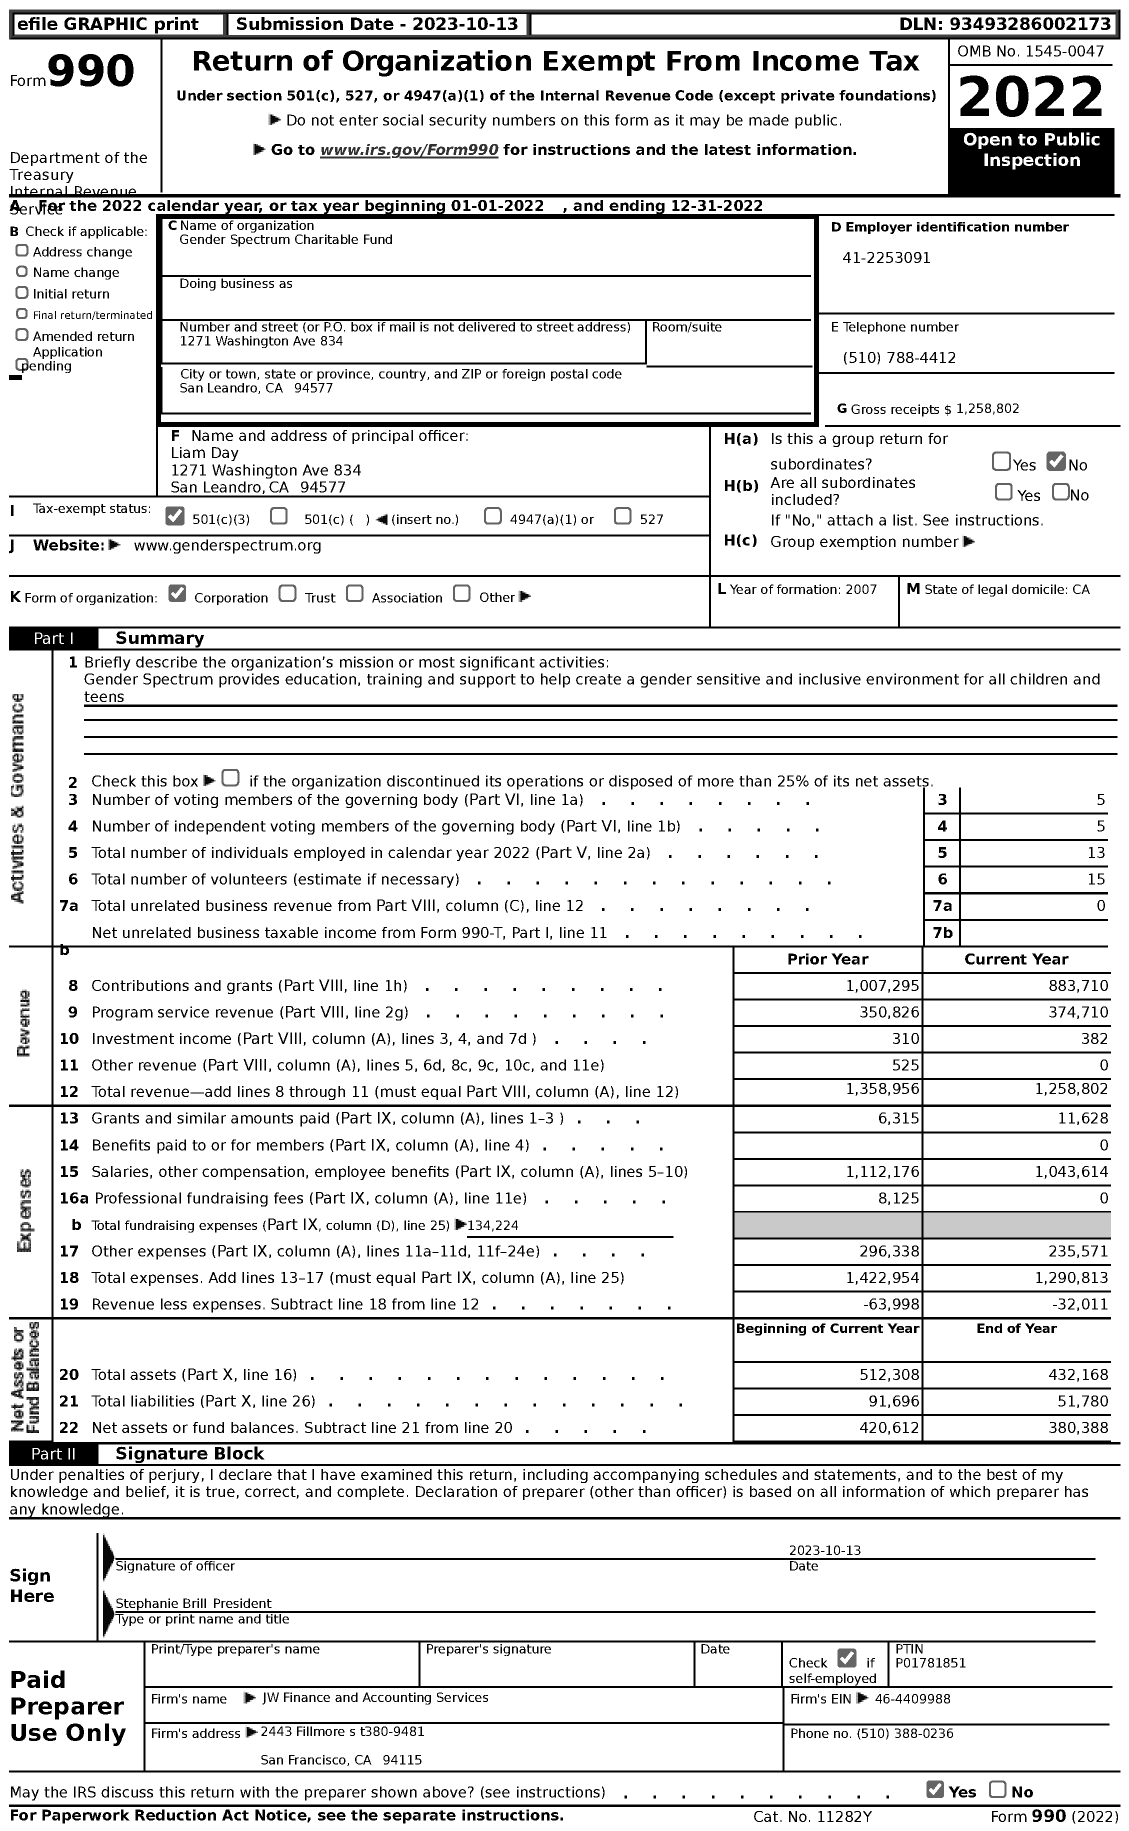 Image of first page of 2022 Form 990 for Gender Spectrum Charitable Fund